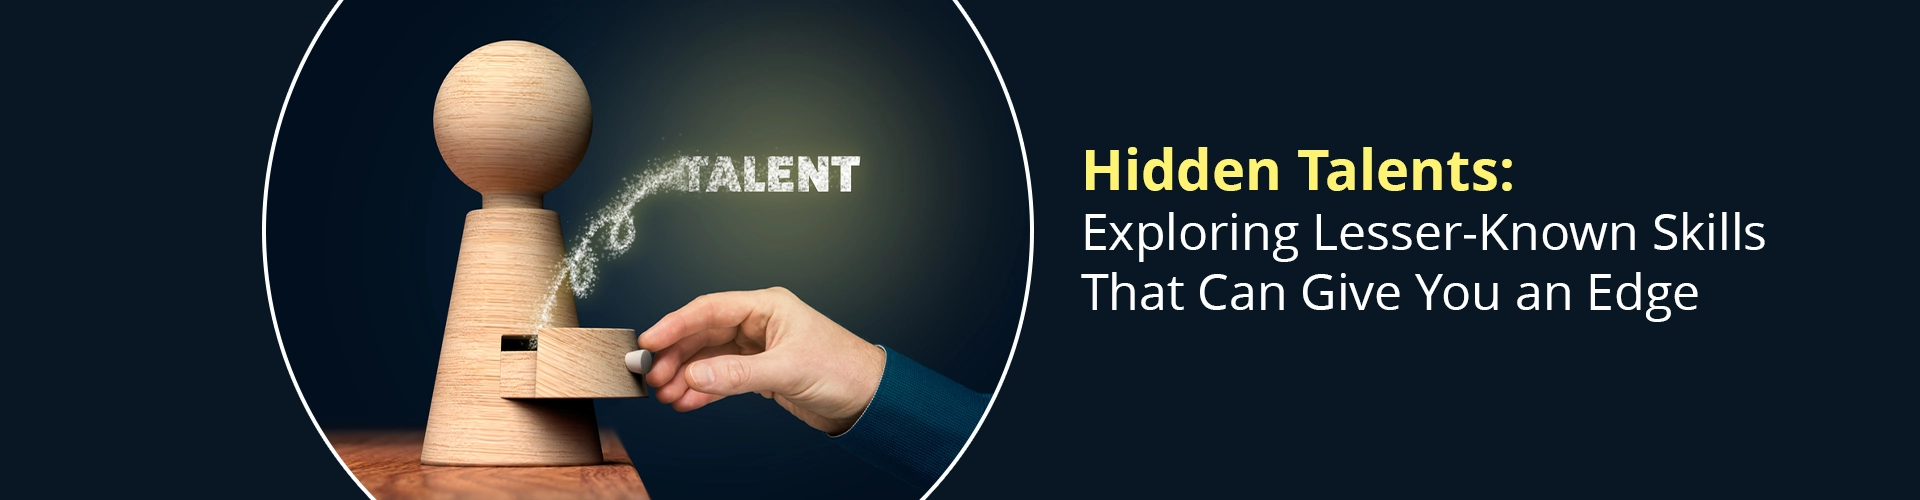 Hidden Talents: Exploring Lesser-Known Skills That Can Give You an Edge